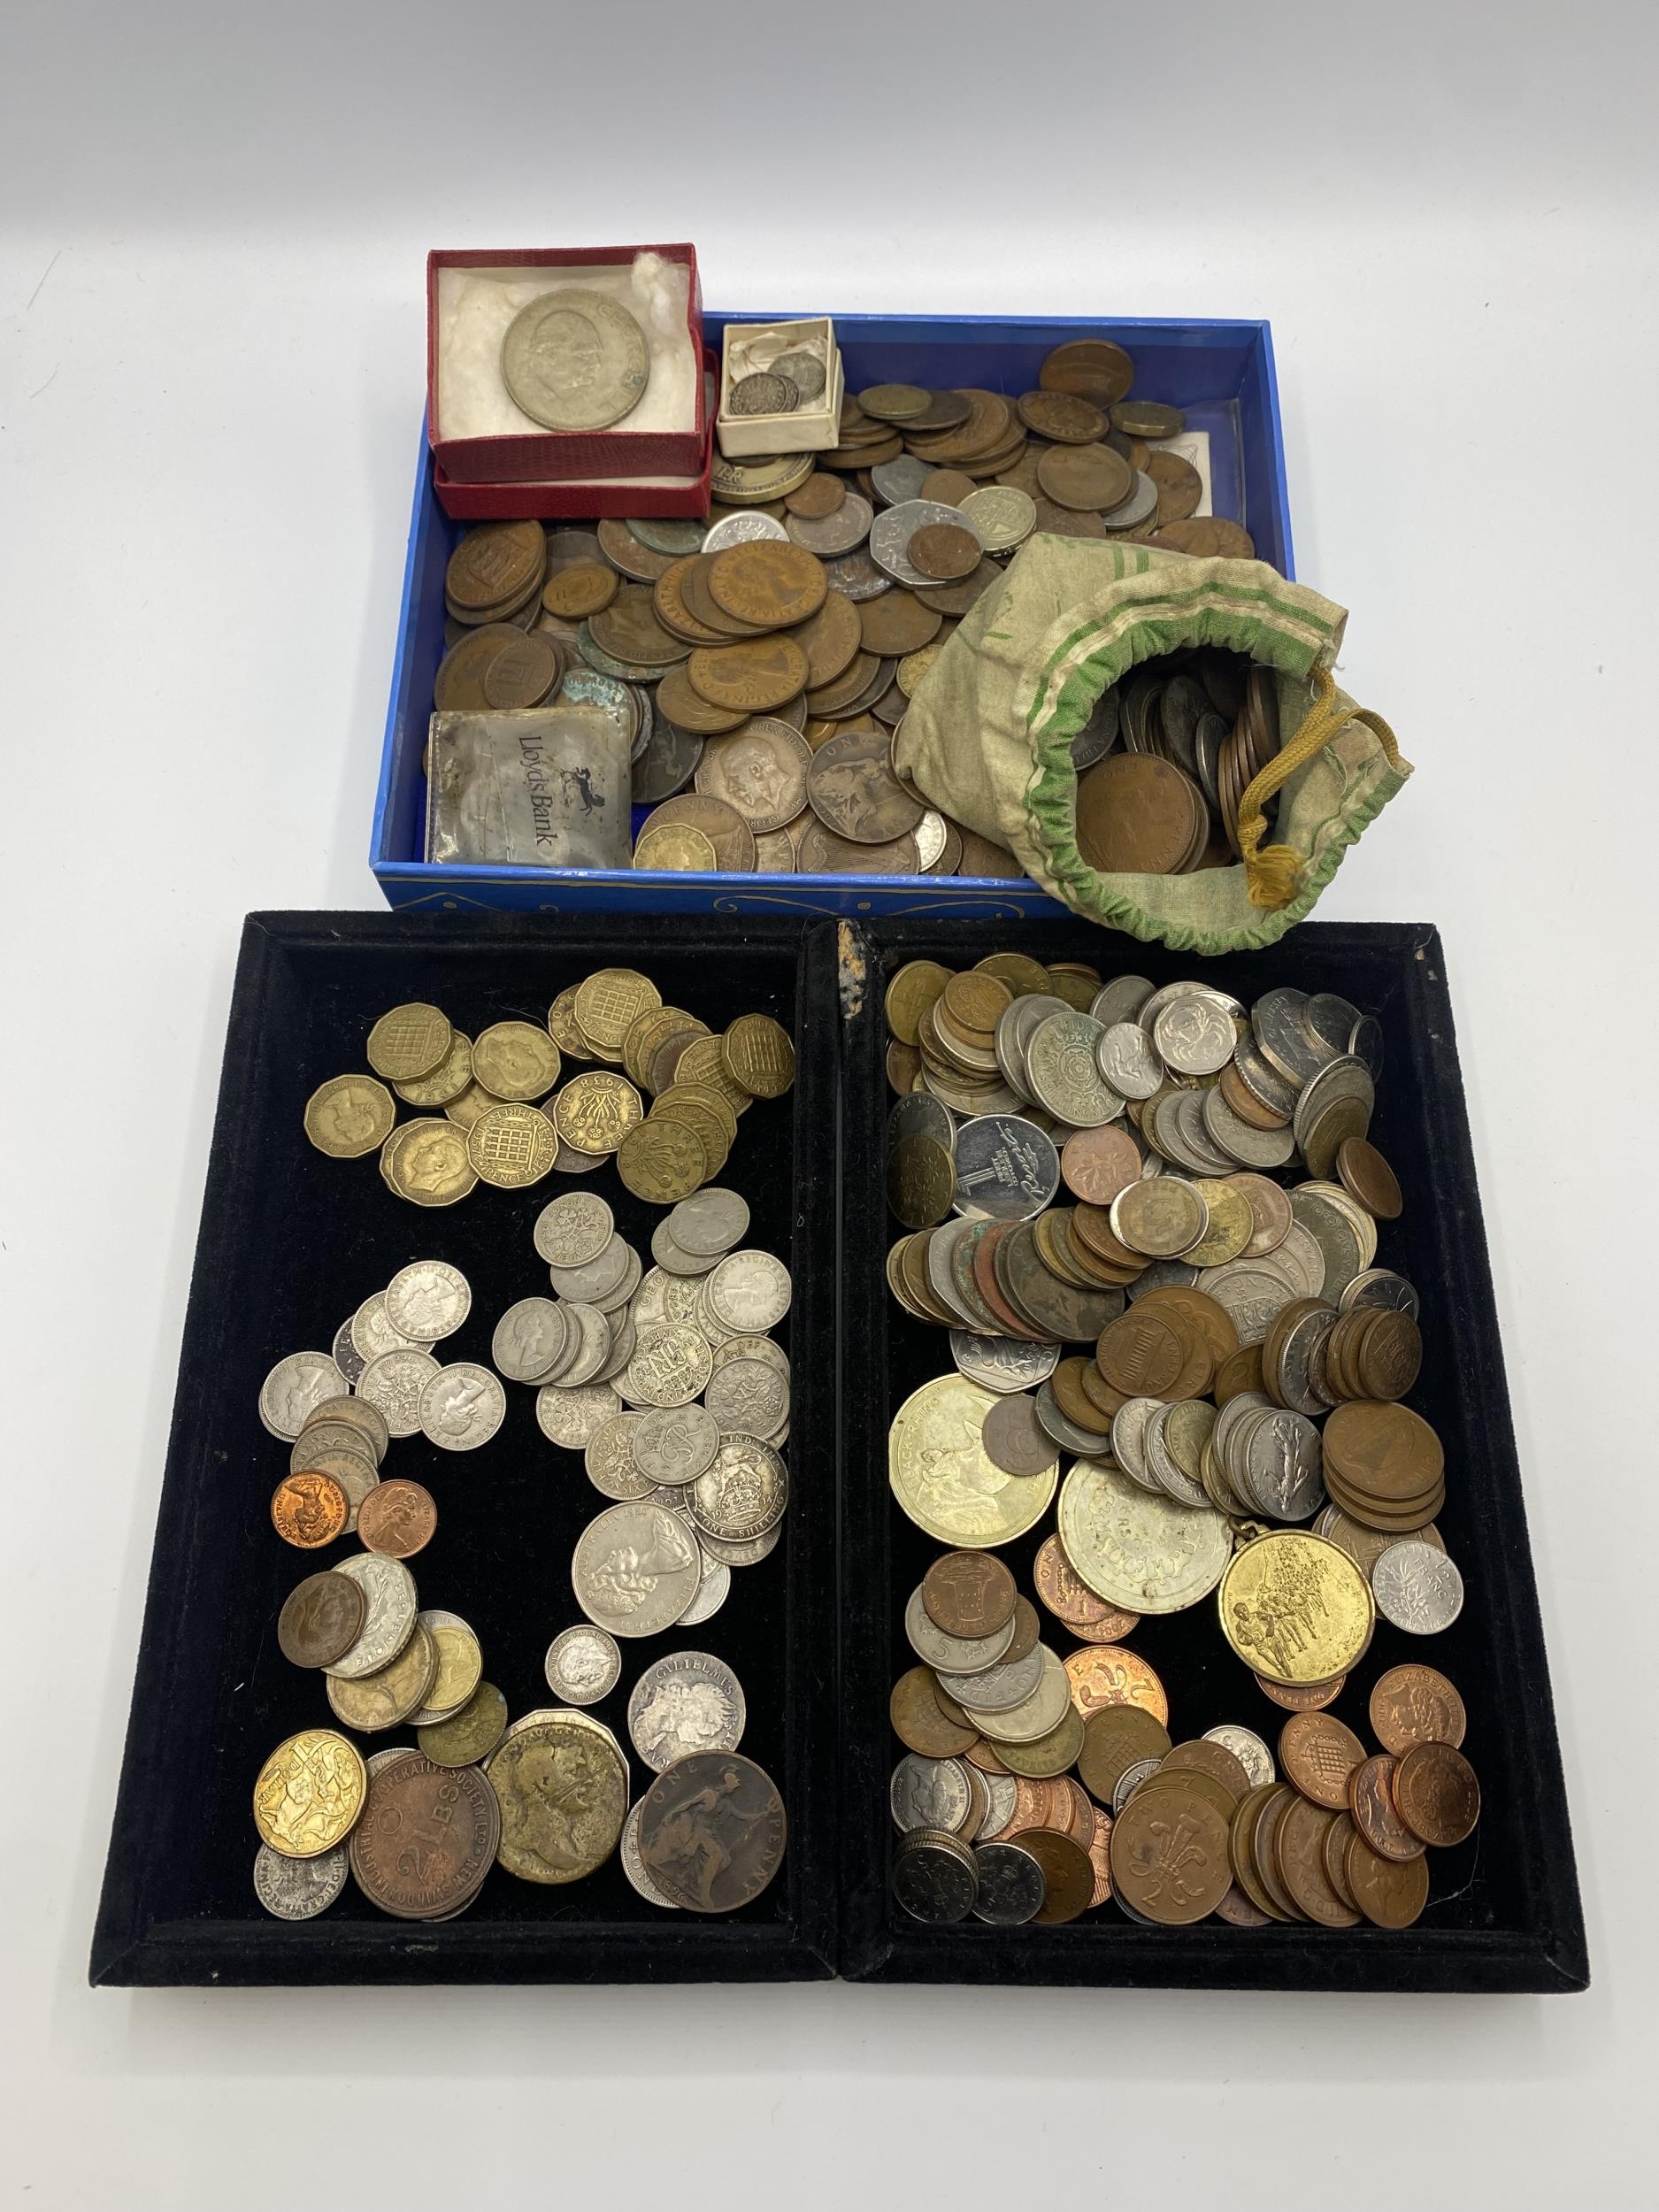 A collection of 19th and 20th century British coinage.